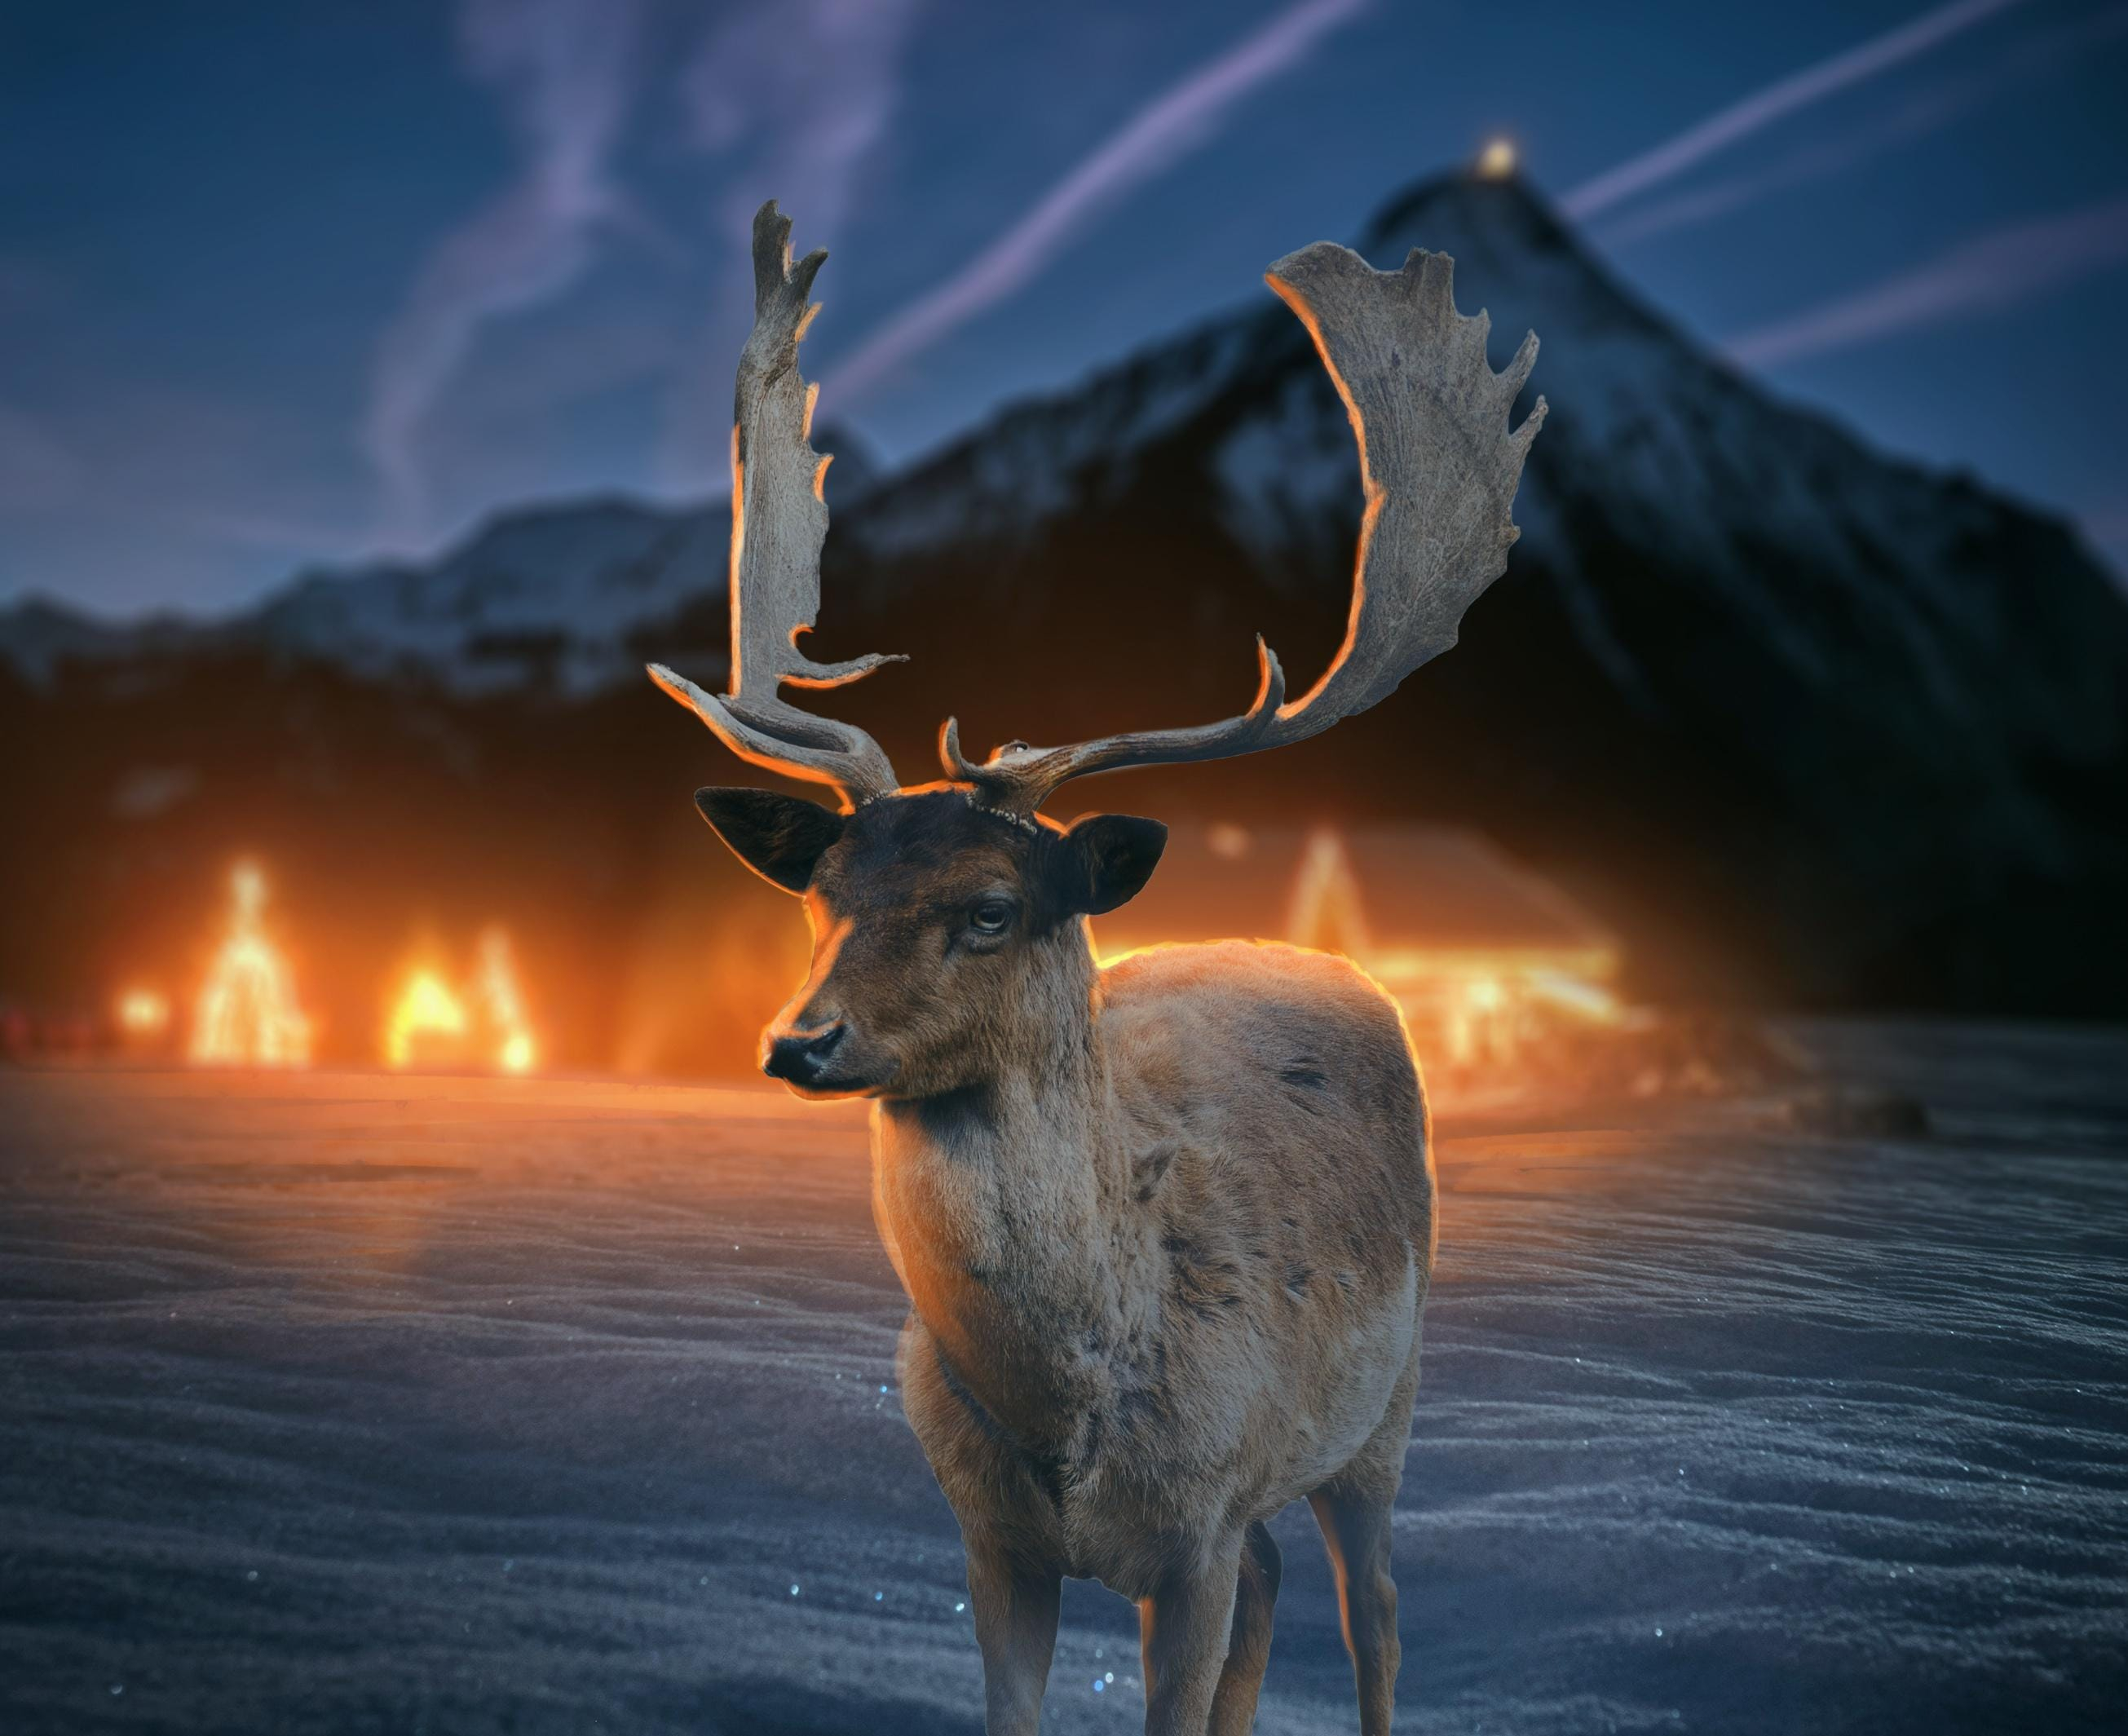 2610x2129 A reindeer is standing in the snow free image Pixexid